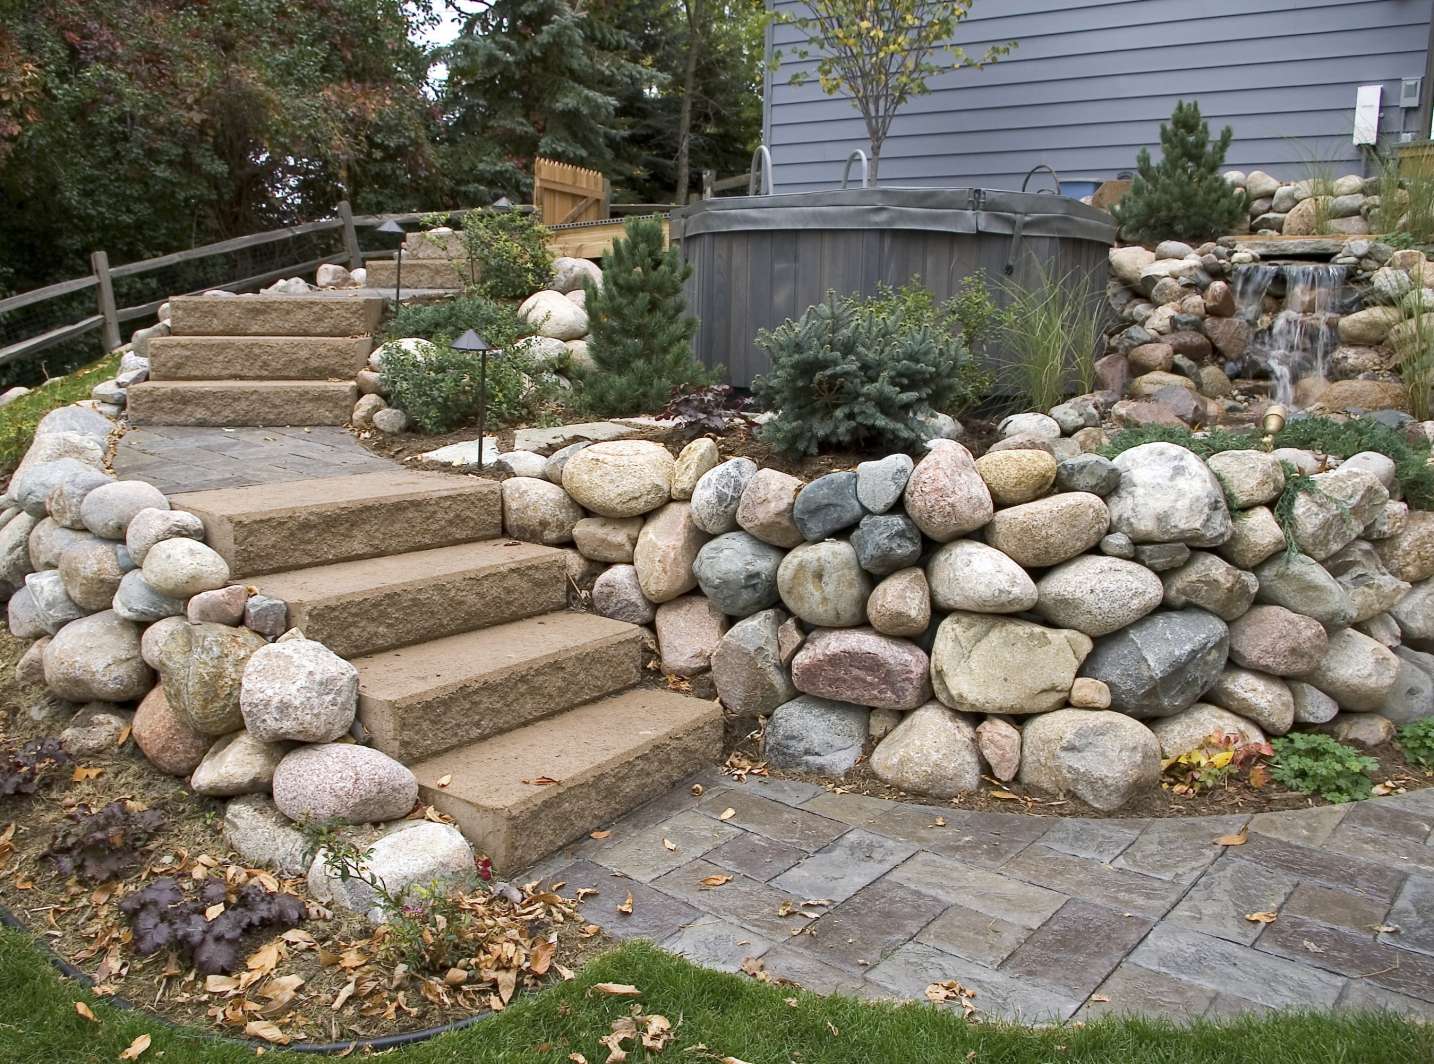 Landscaping Ideas For A Retaining Wall - Image to u